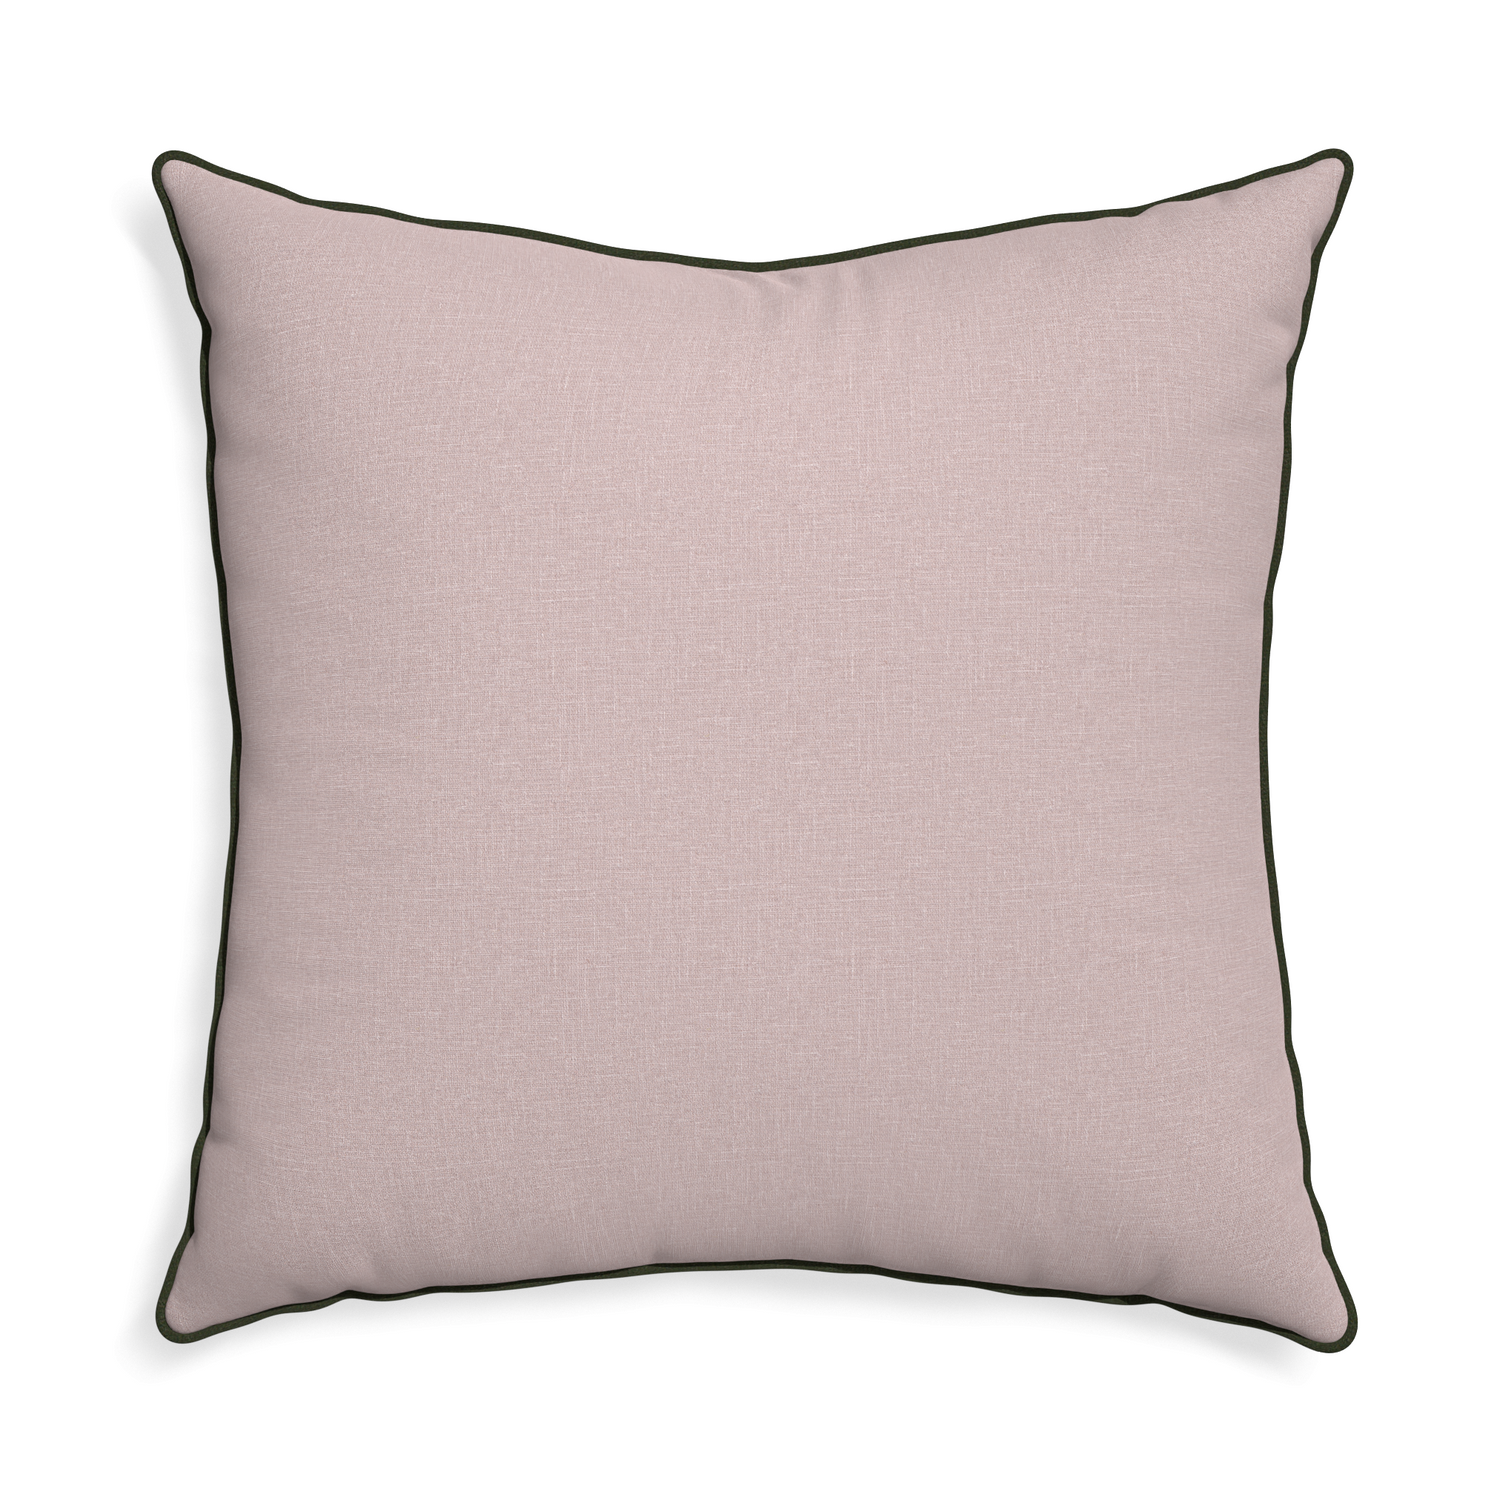 Euro-sham orchid custom mauve pinkpillow with f piping on white background